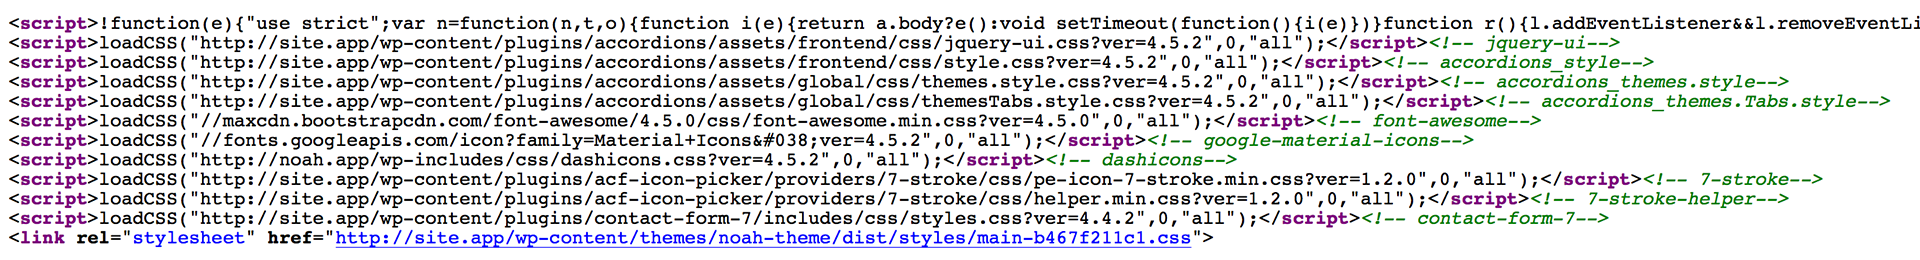 The result of having the main stylesheet load synchronously while the additional stylesheets loads asynchronously.